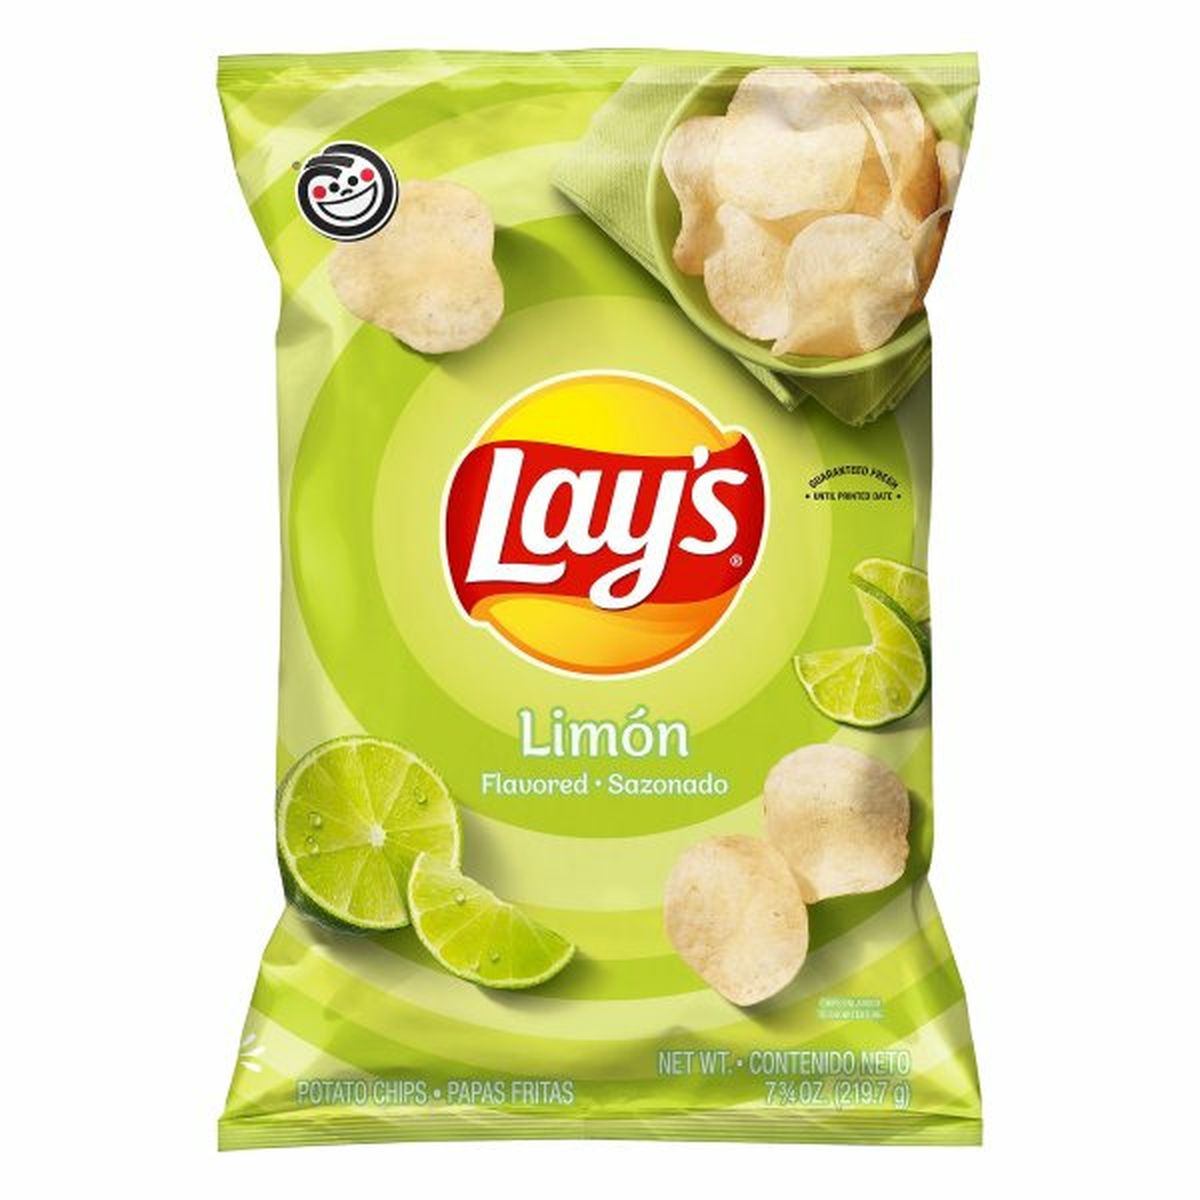 Calories in Lay's Potato Chips, Limon Flavored